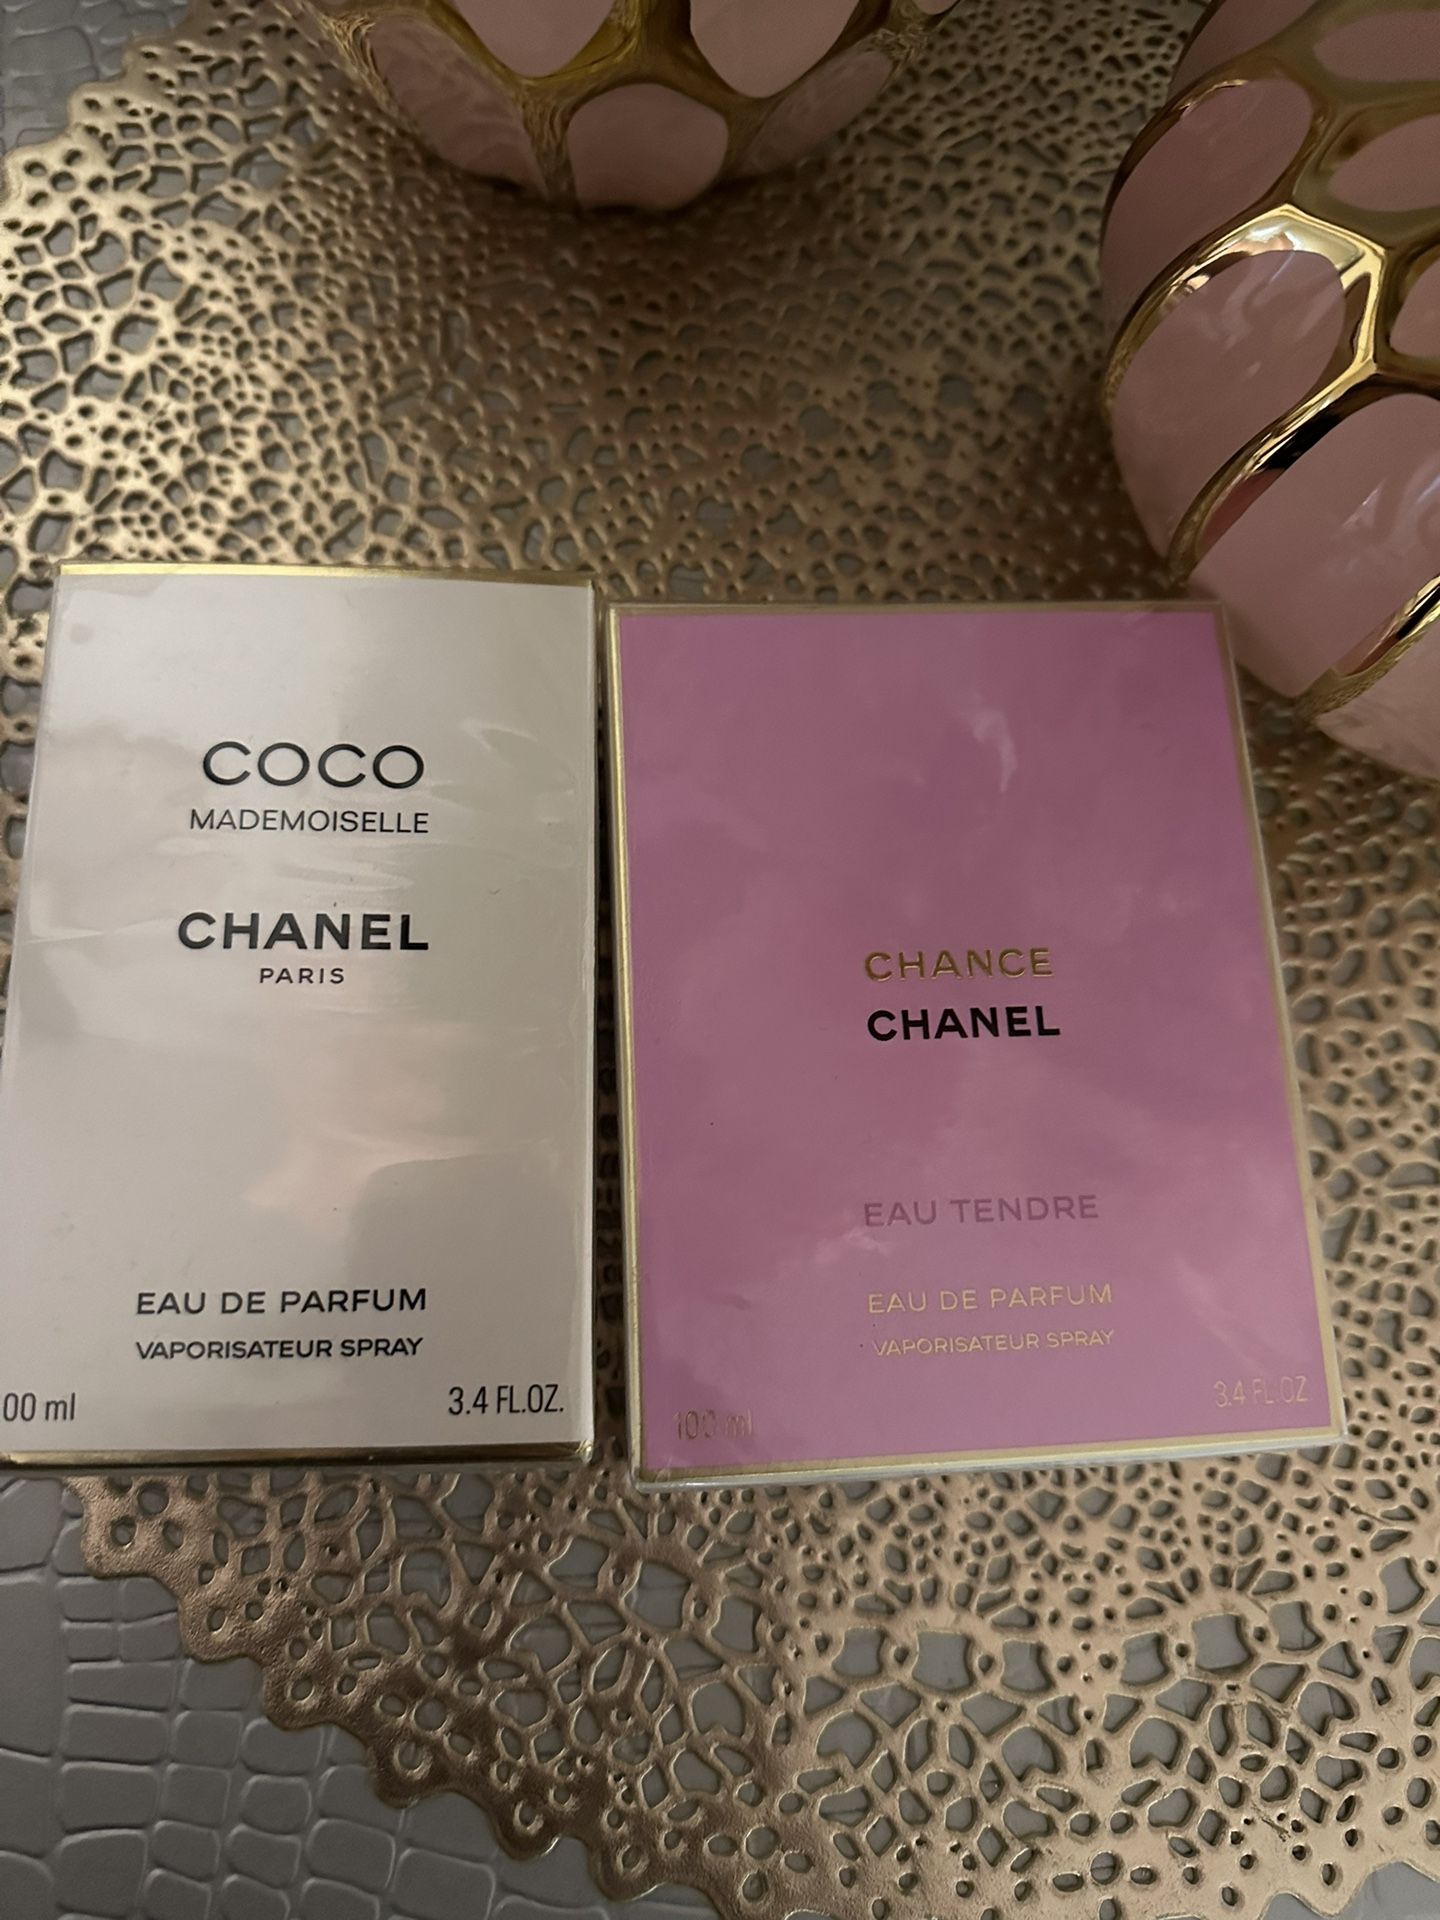 Chanel’s Perfumes Each One $100